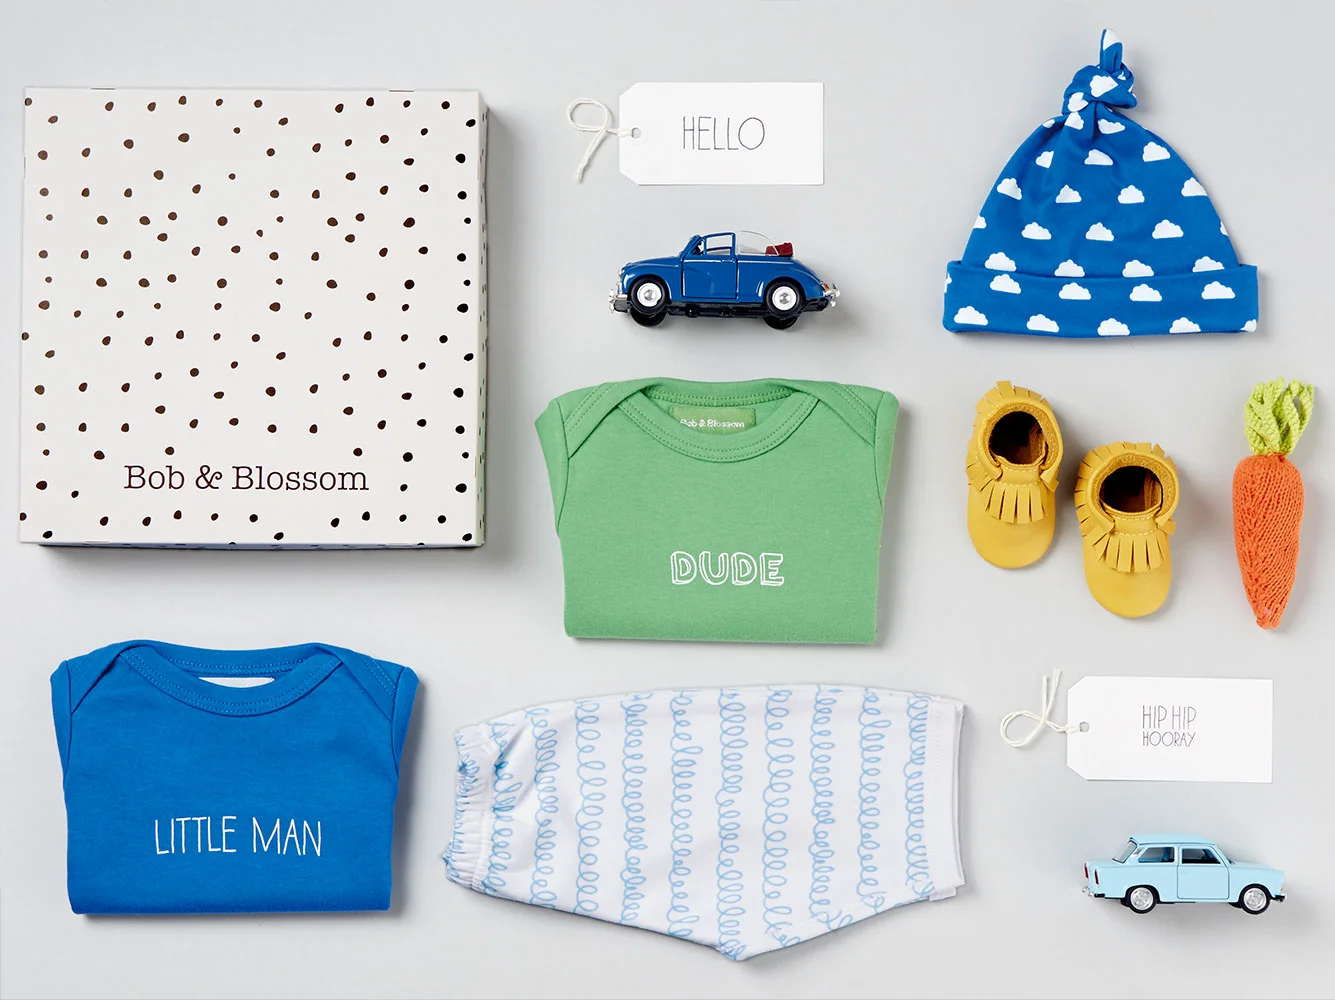 a selection of packaging and printed textiles designed by Petits Papiers for Bob & Blossom